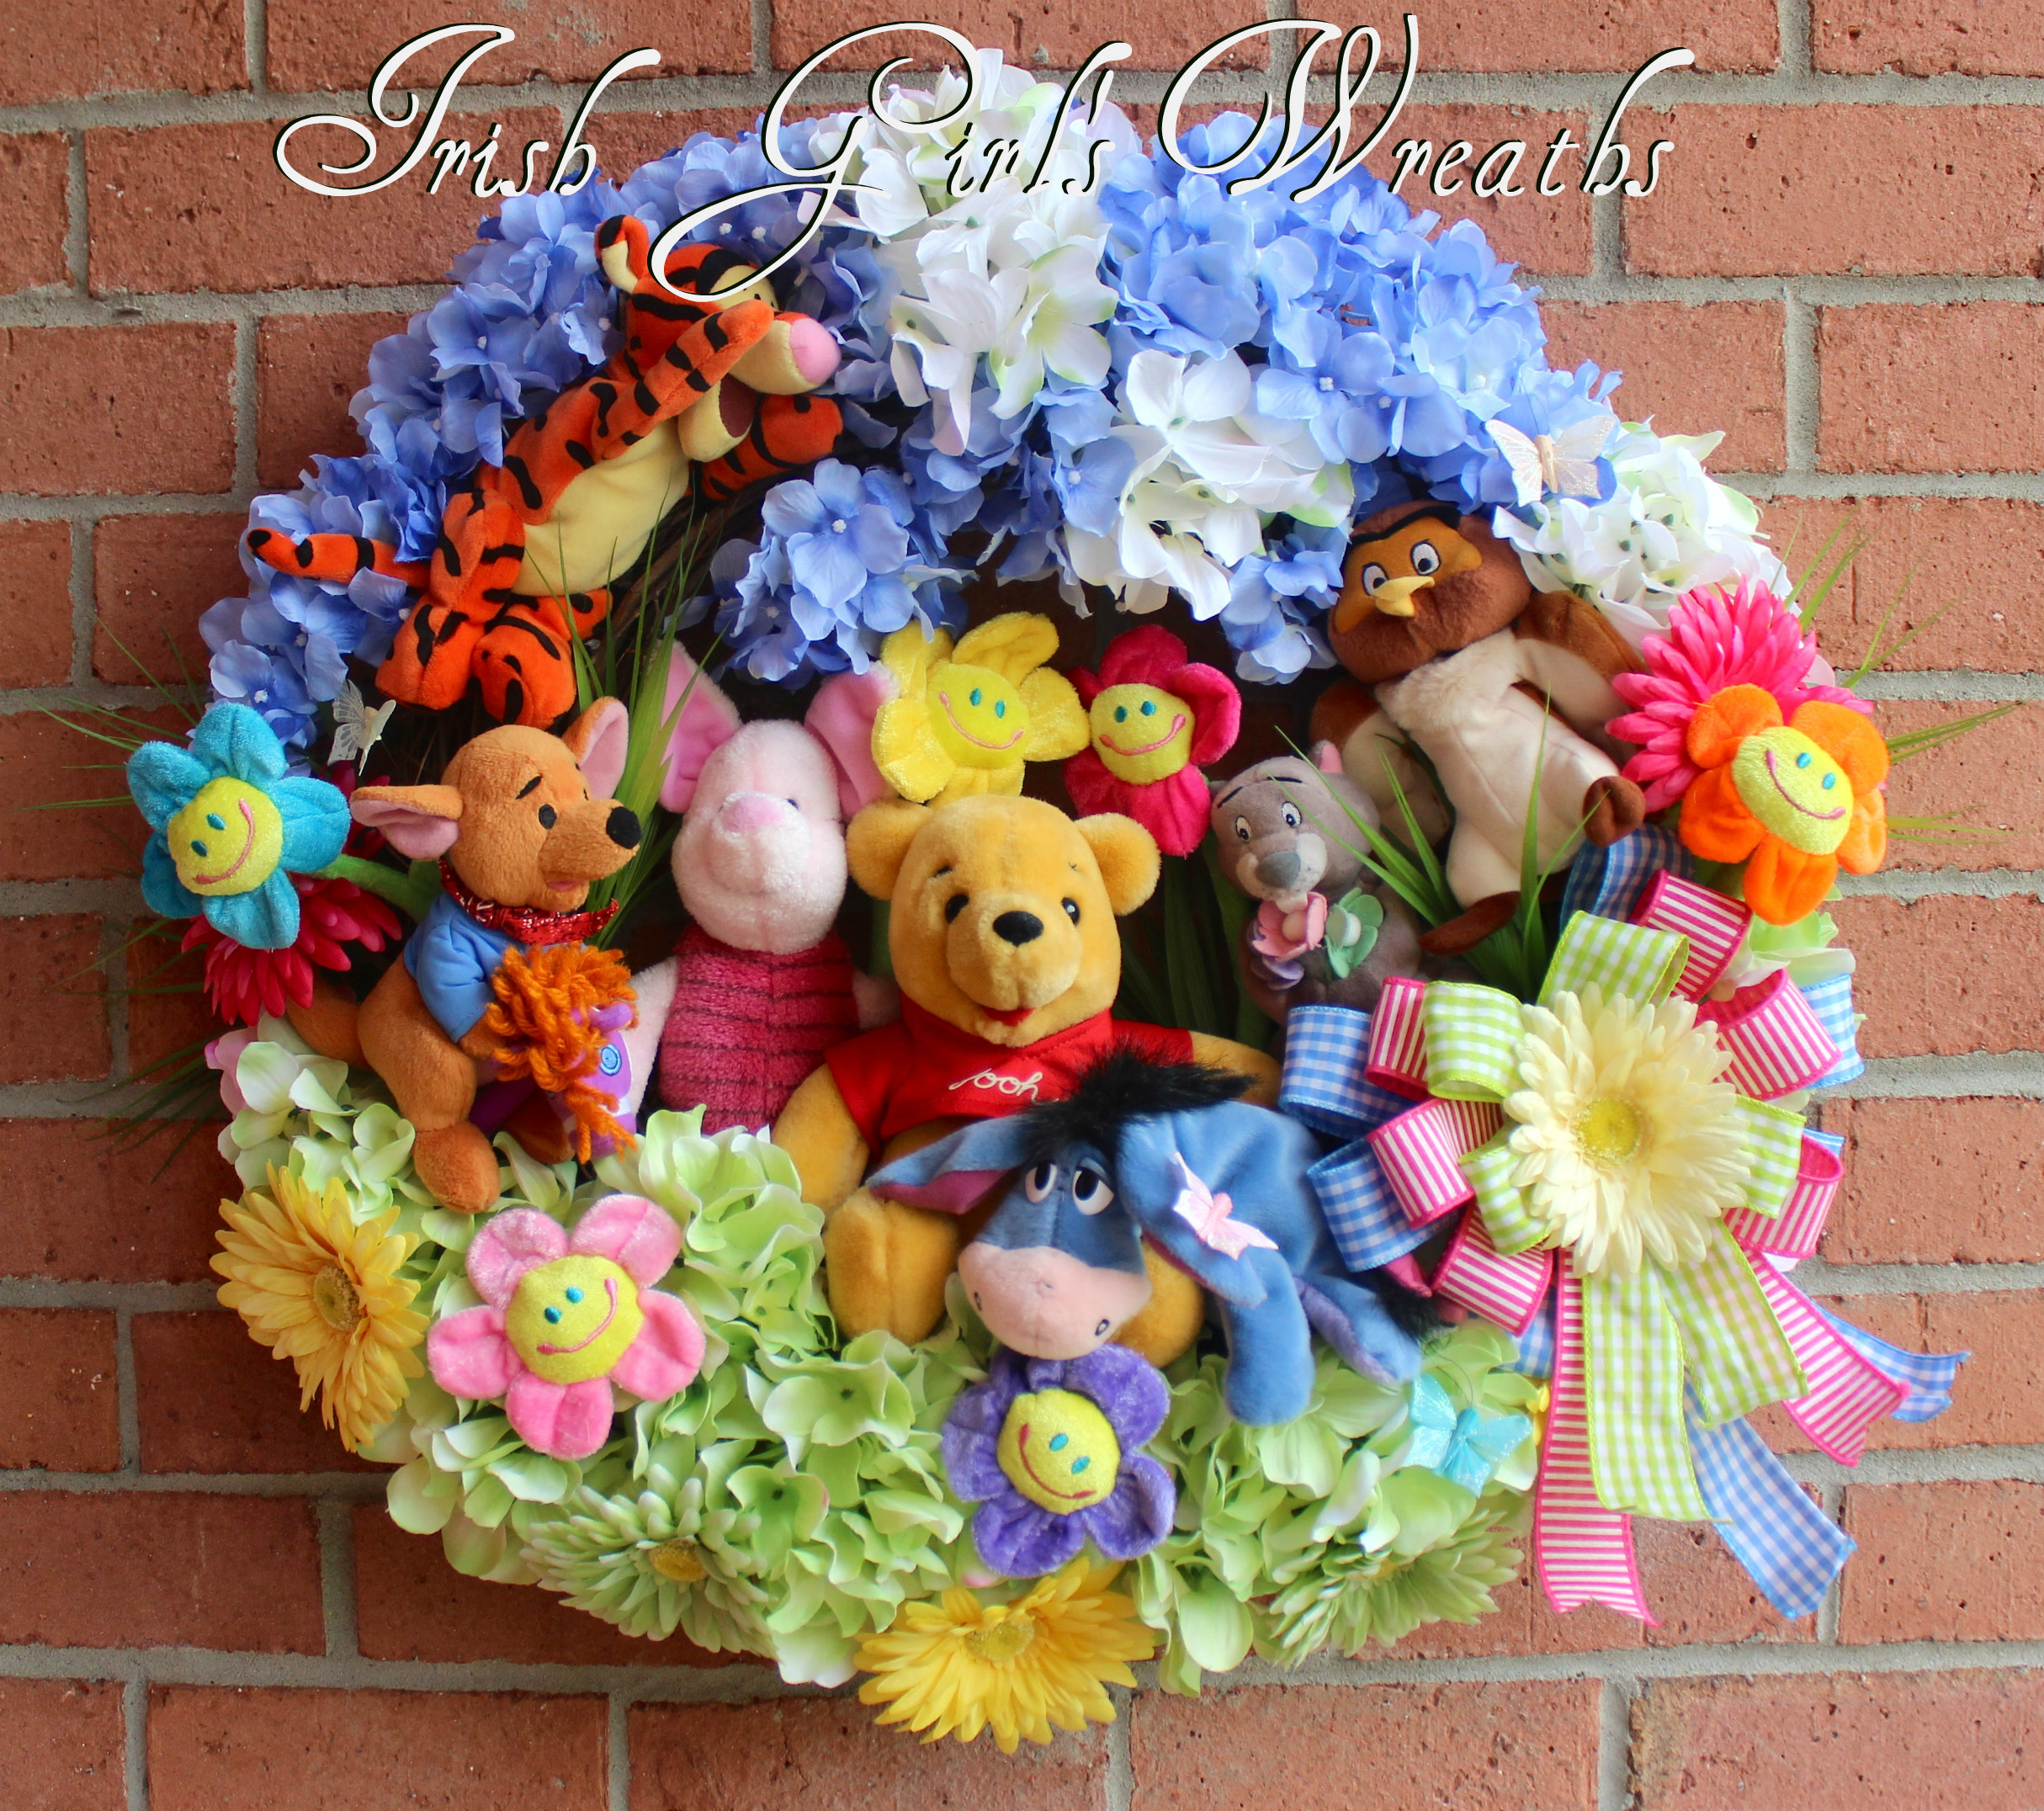 Winnie the Pooh and Friends Wreath – Custom Order for fabulous repeat customer, Dolores